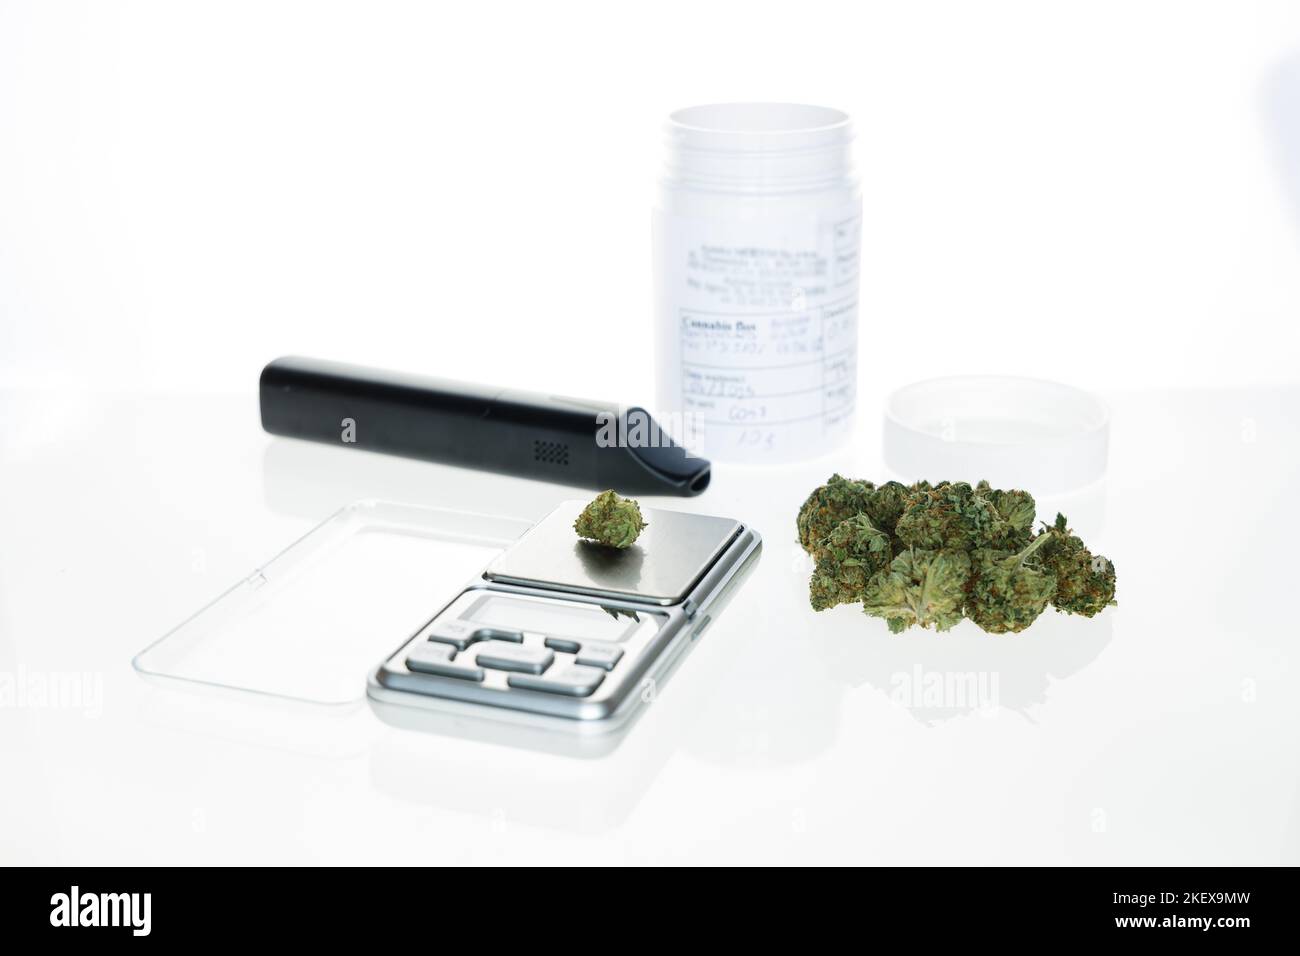 Cannabis flos, medical marijuana pile next to precision scale, vaporizer and white container, safe way to take medicine Stock Photo